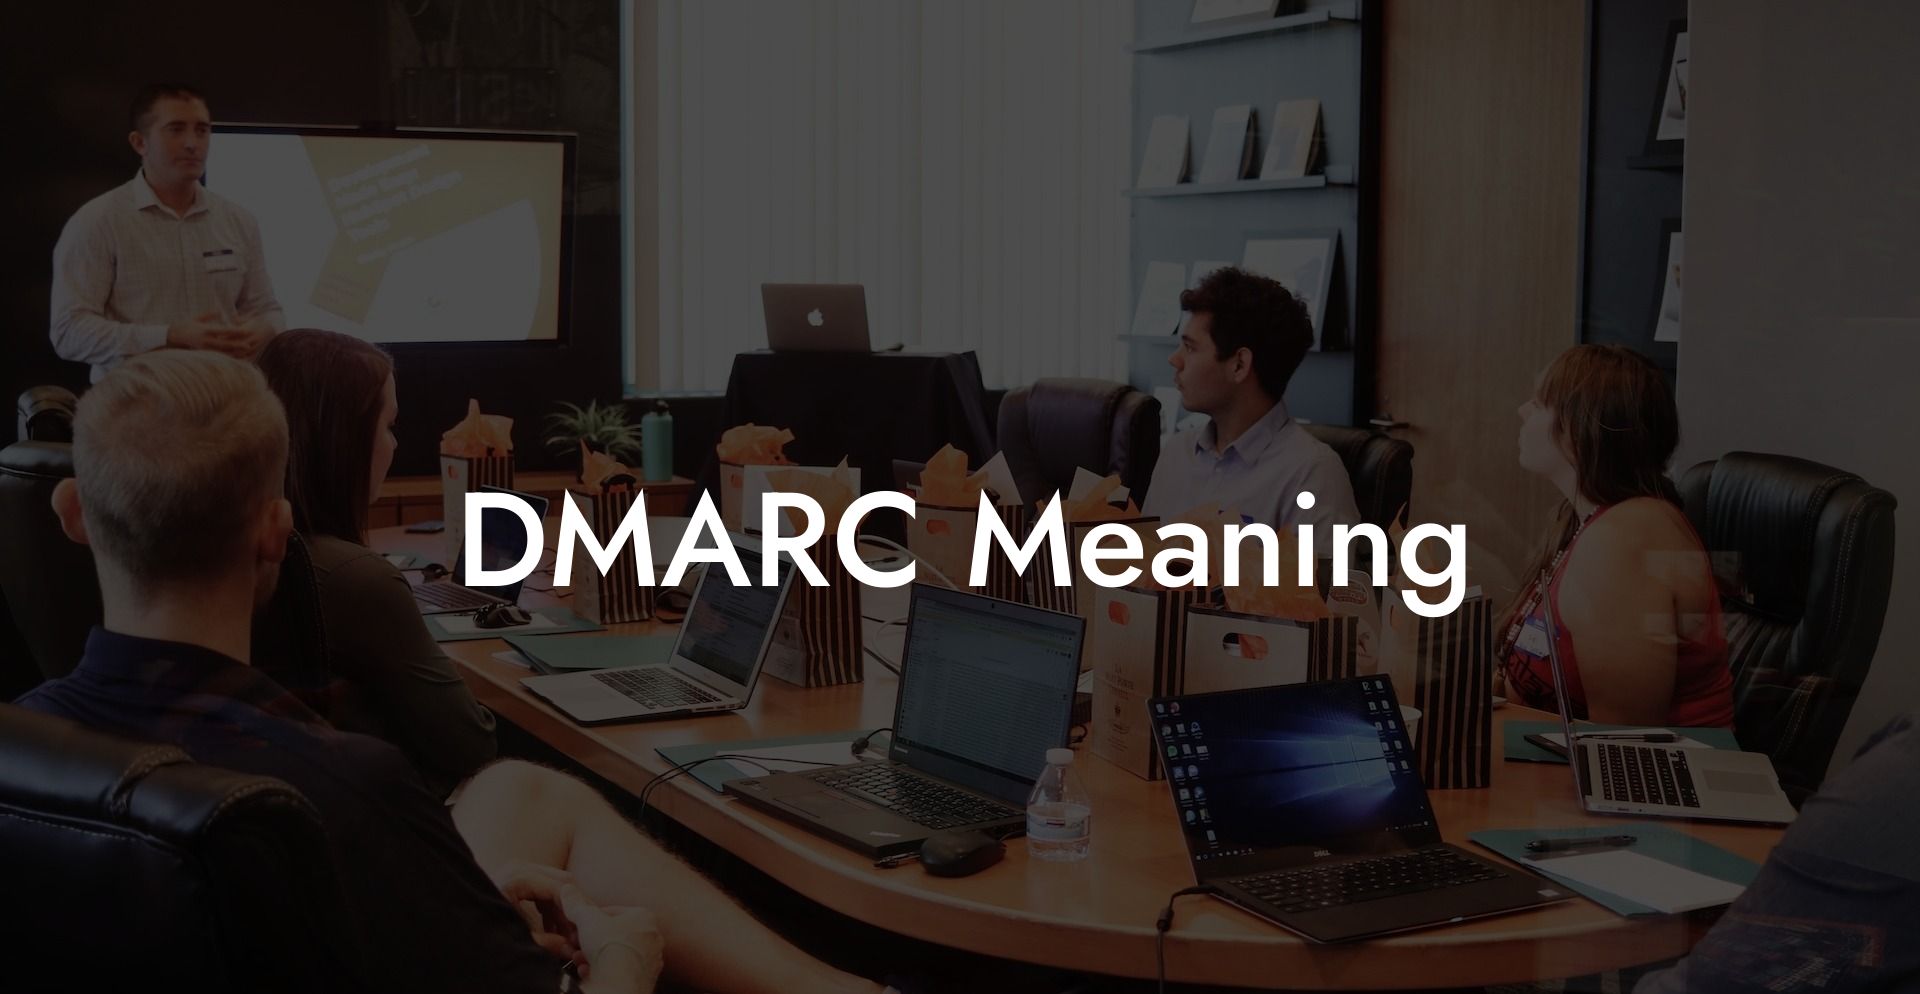 DMARC Meaning